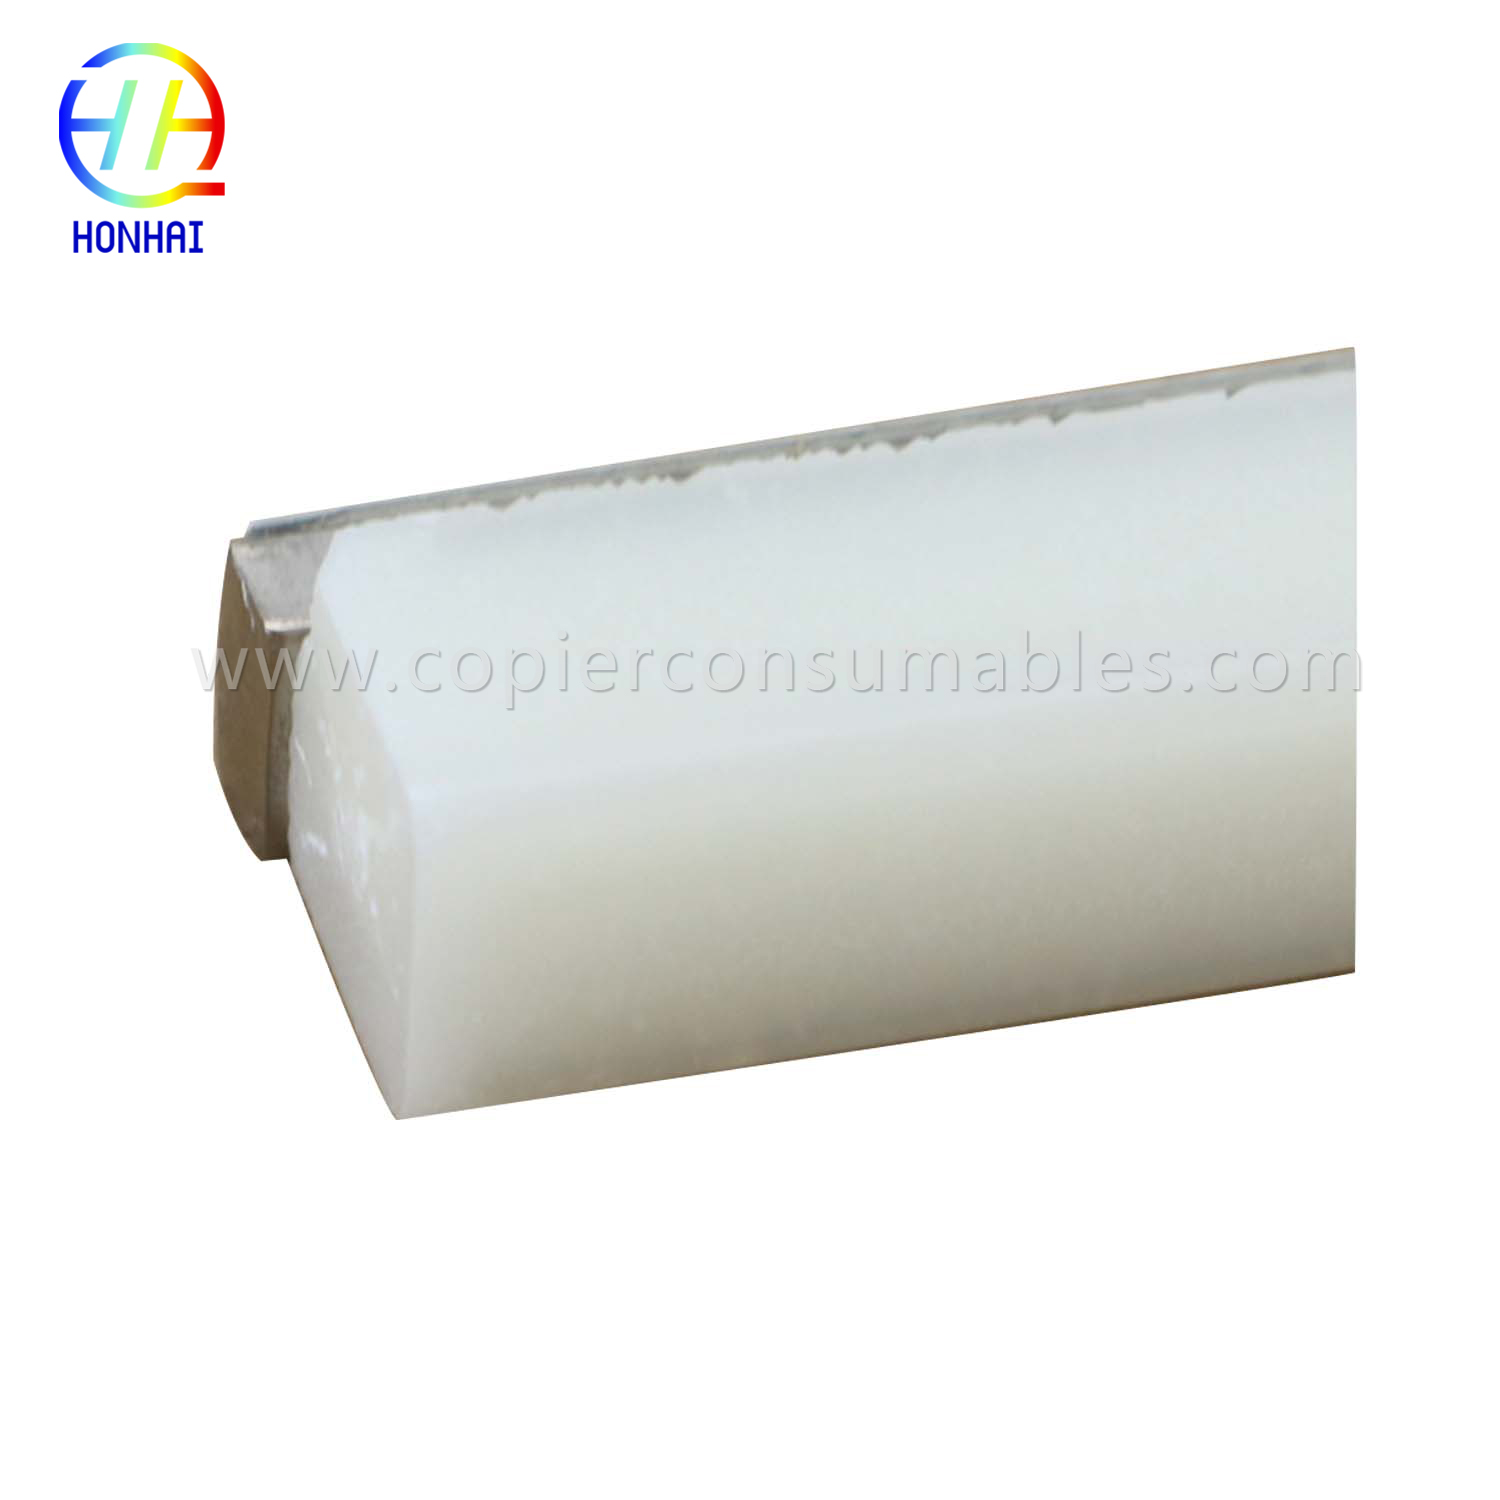 2ND Transfer Roller Lubricant Bar for Xerox FUJI Workcentre 550 560 570 J75 C75 700 5580 6680 7780 (3) 拷贝